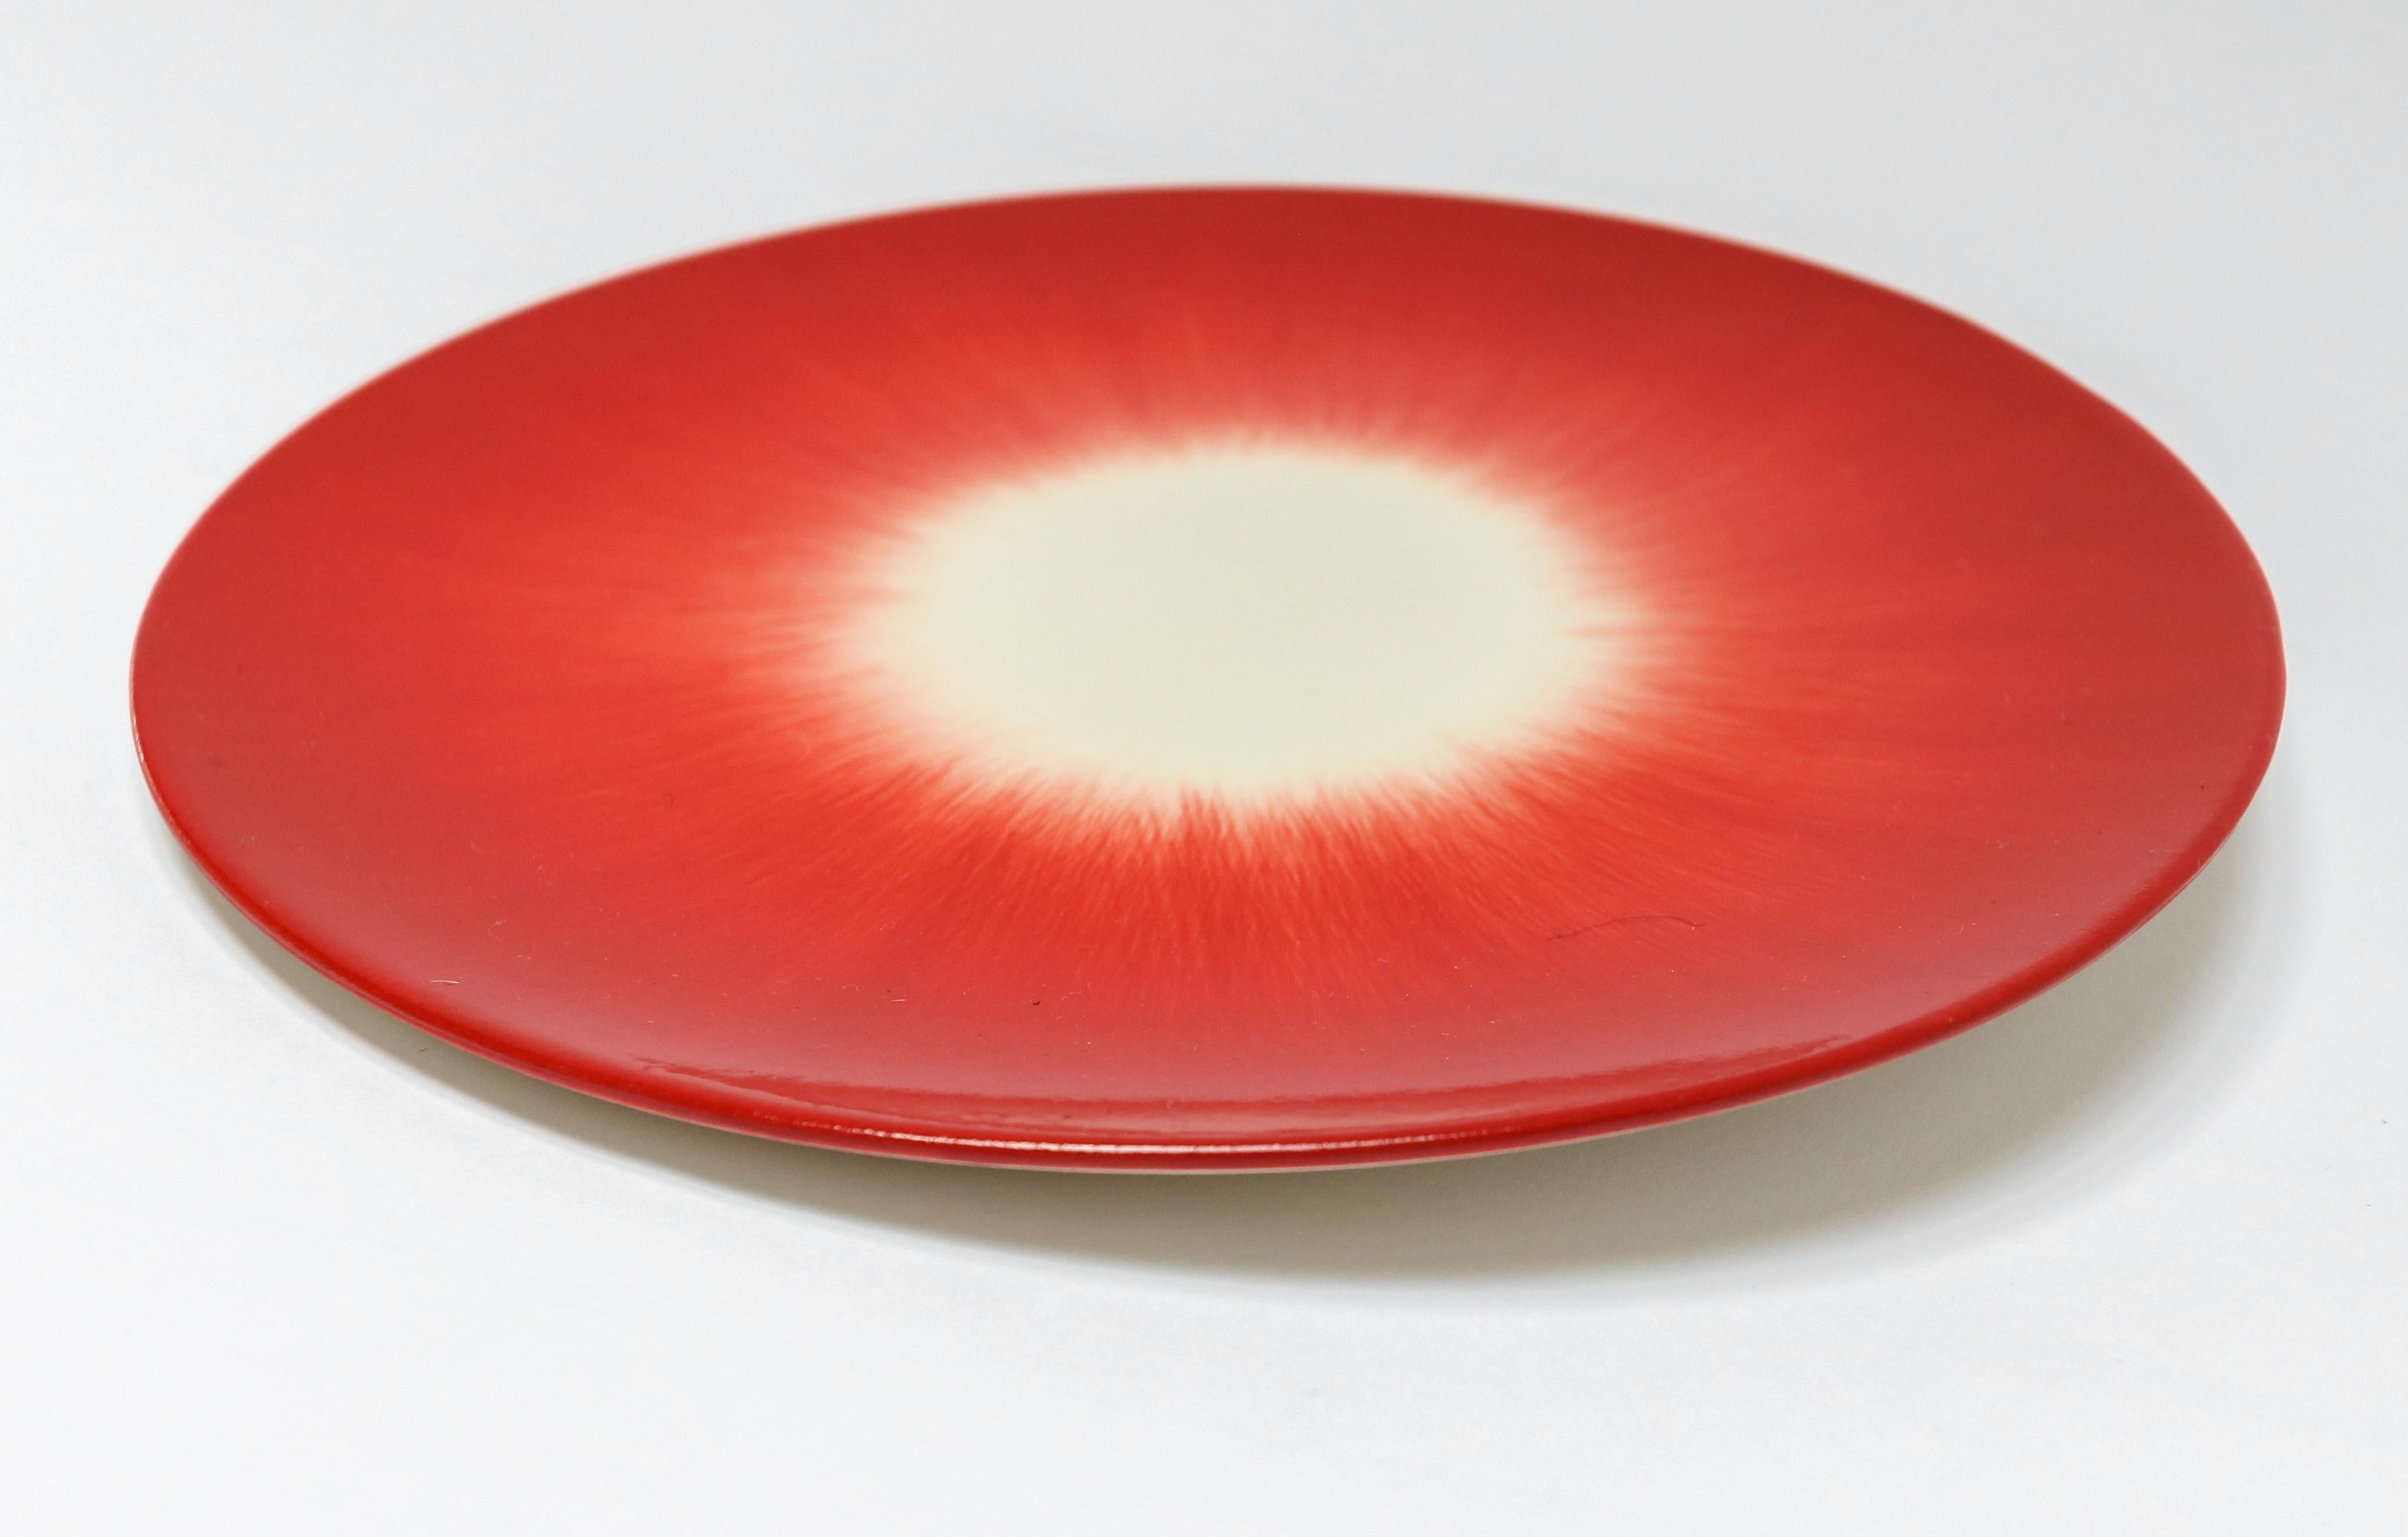 Ann Demeulemeester for Serax Dé bread plate in off white / red. Hand painted with a starburst pattern. Measures: 14cm diameter x 0.7 cm high. Must be purchased in quantities of two.